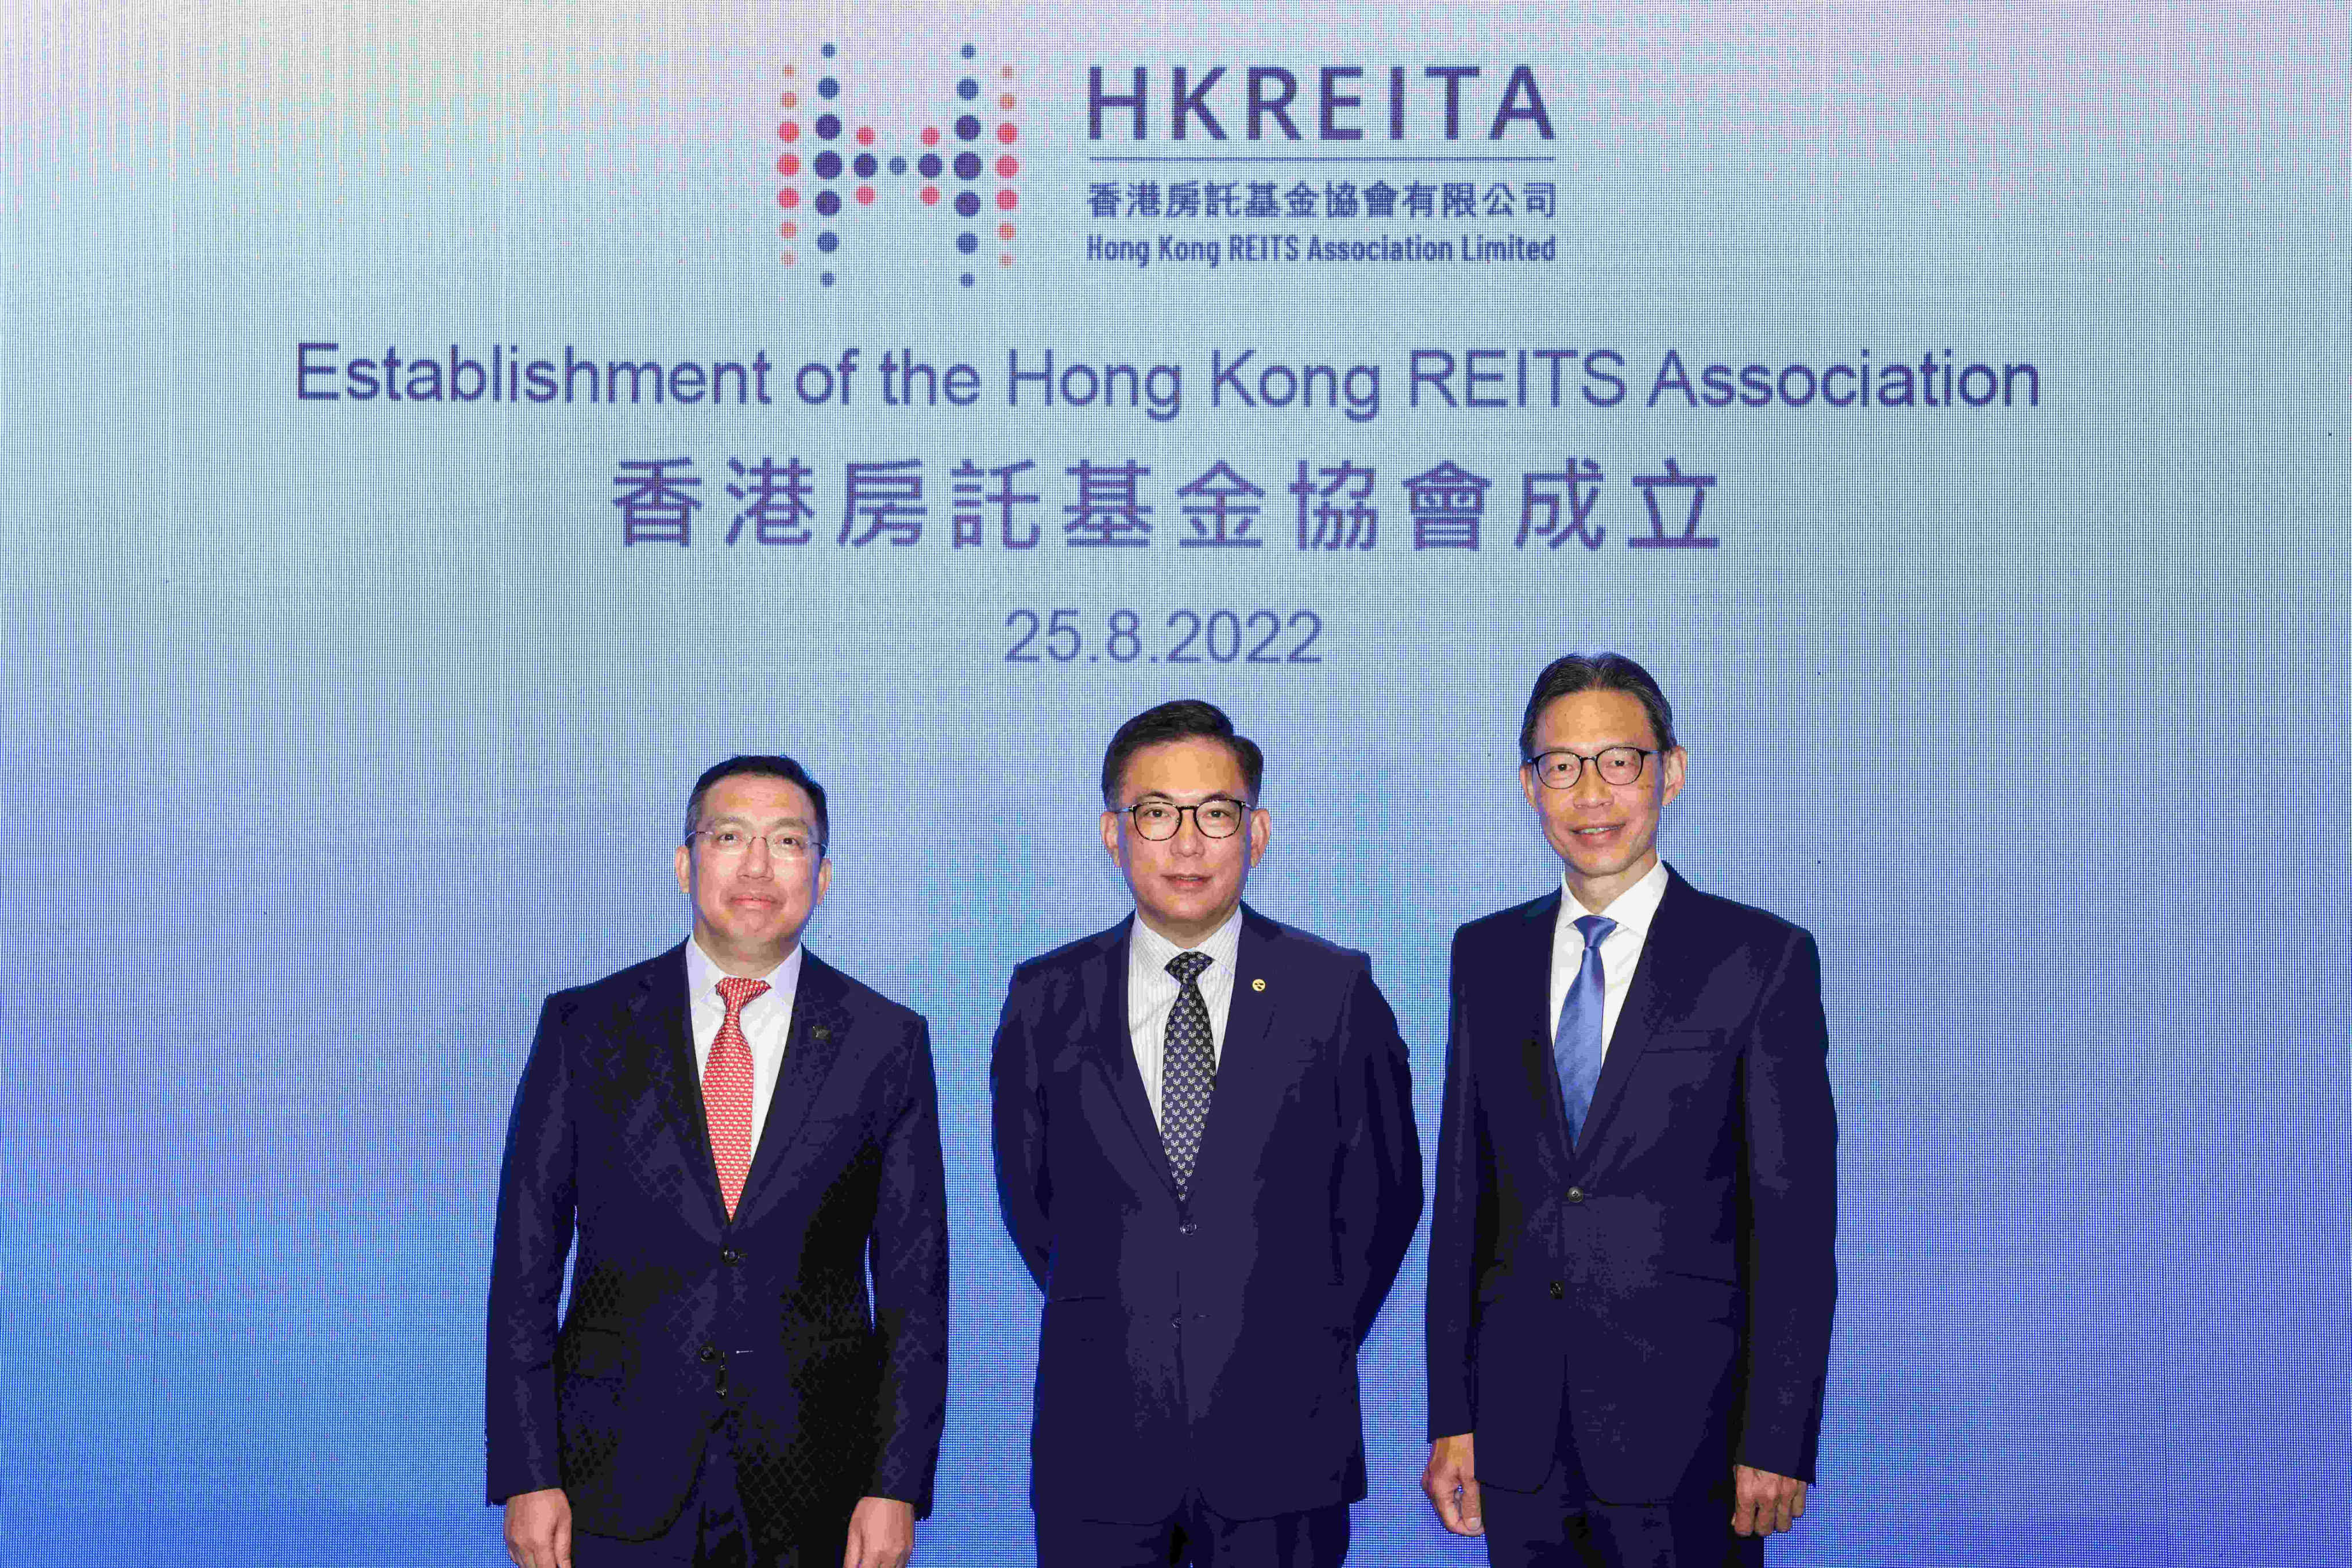 From left, Lin Deliang, Yuexiu Reit’s CEO and HKREITA’s honorary founding president; George Hongchoy, Link Reit’s CEO and HKREITA chairman; and Hubert Chak, honorary founding president of HKREITA and CEO of SF Reit, at Thursday’s event. Photo: Handout